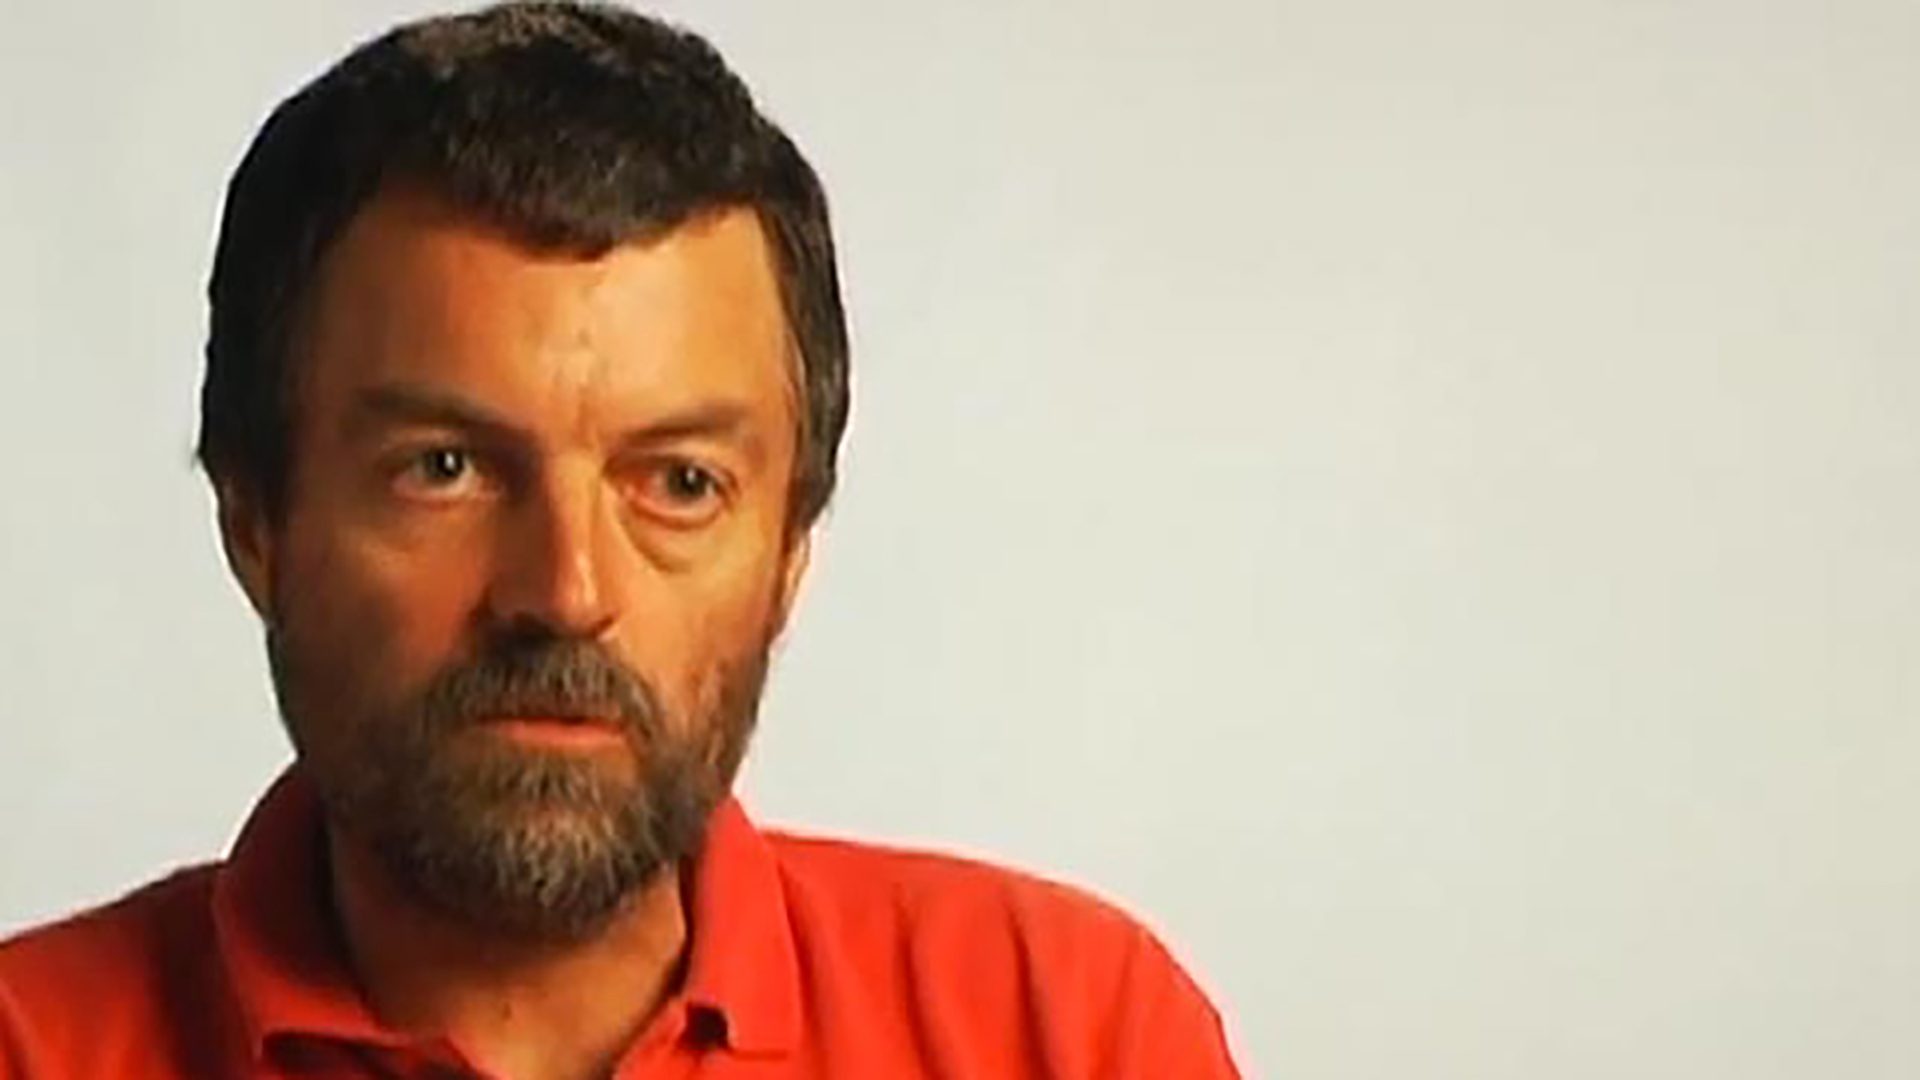 An adult man being interviewed wearing a red polo shirt